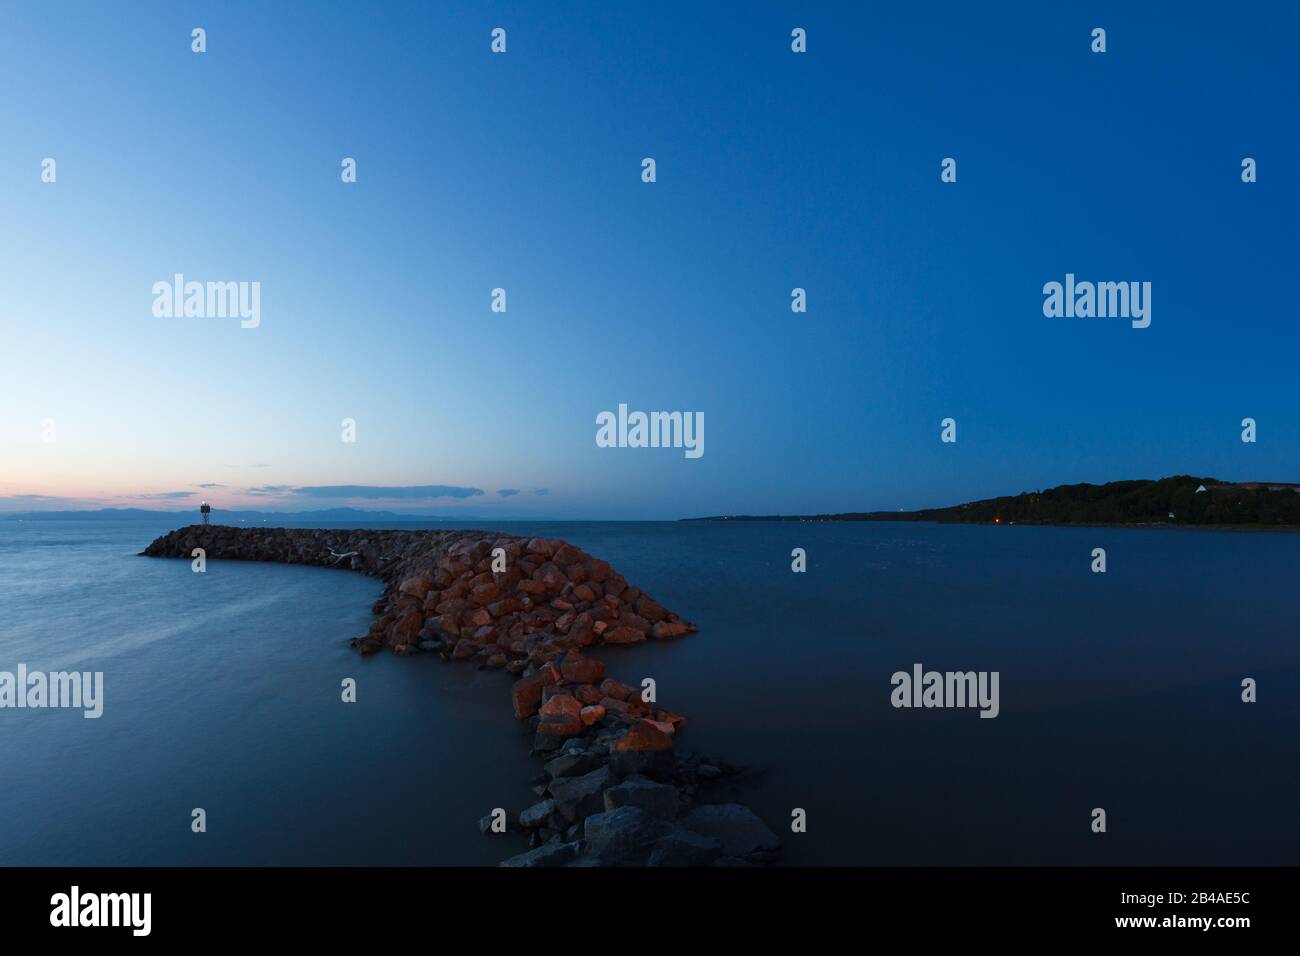 Jetty of rocks on the sjpre of Saint Lawrence river at blue hour. Canada Stock Photo